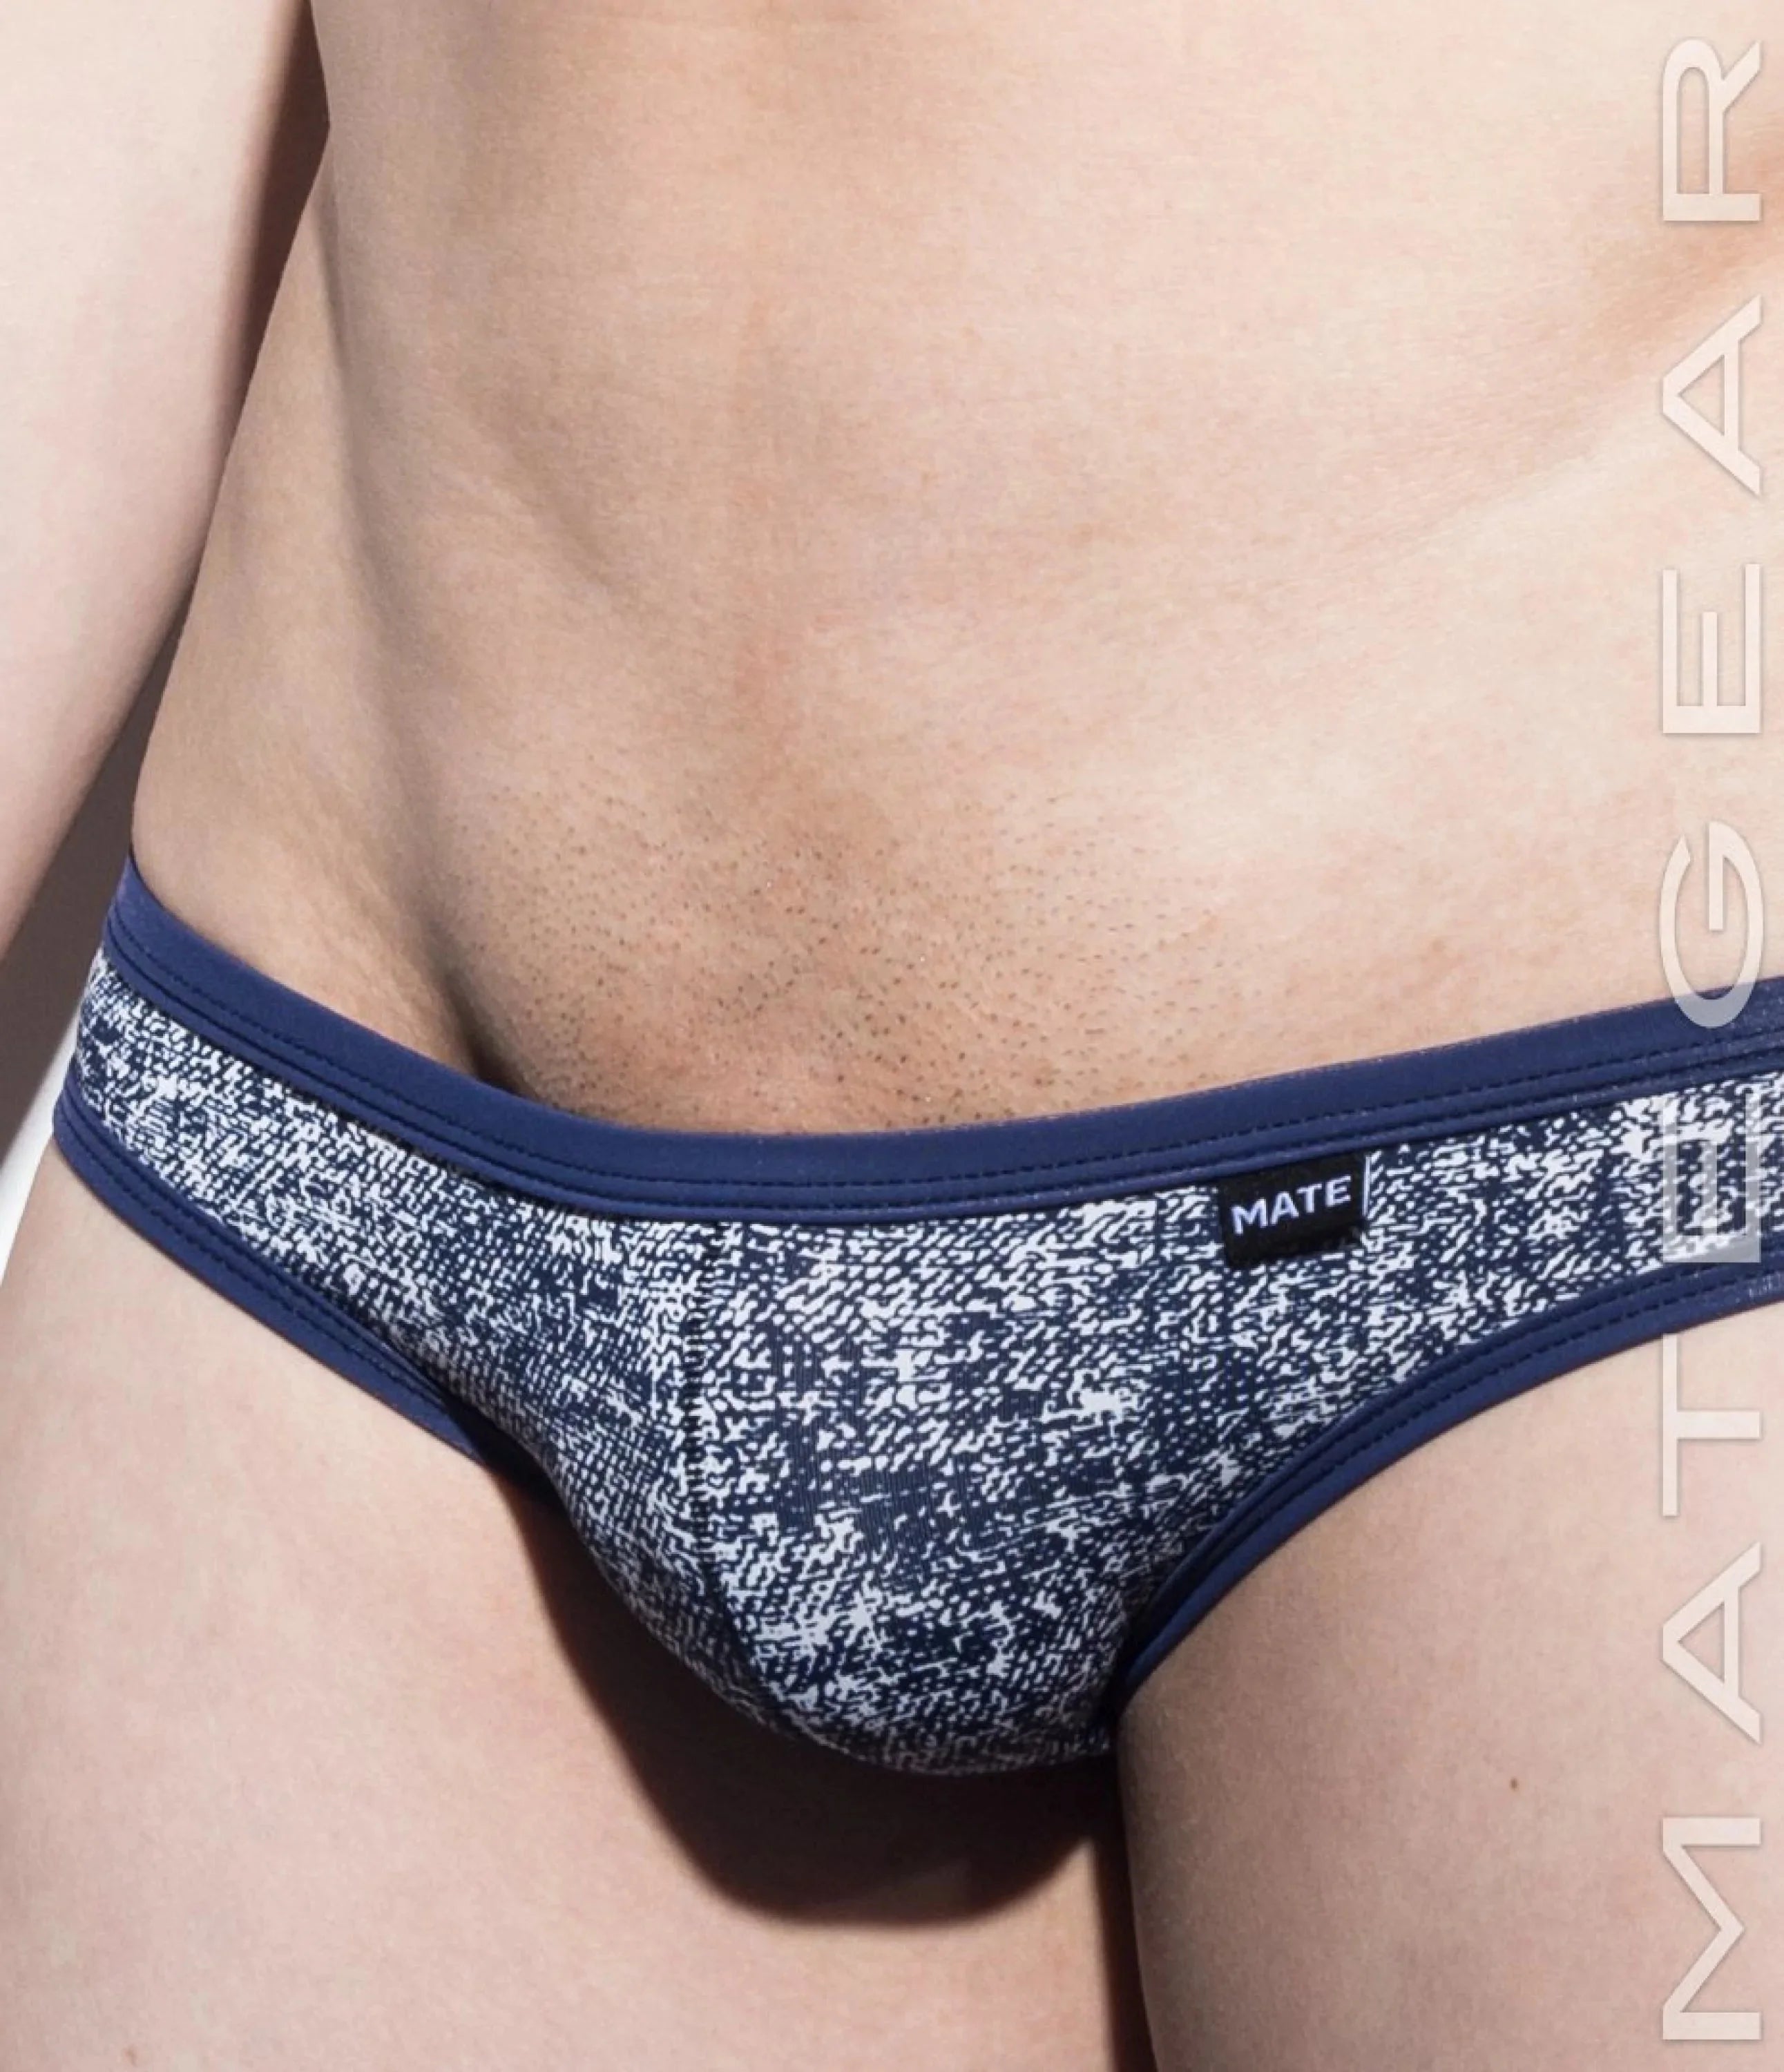 [2Pc/pack] Sexy Mens Underwear Mini Squarecut Trunks - Ran Kwang (Flat Front / Reduced Sides) (Thin